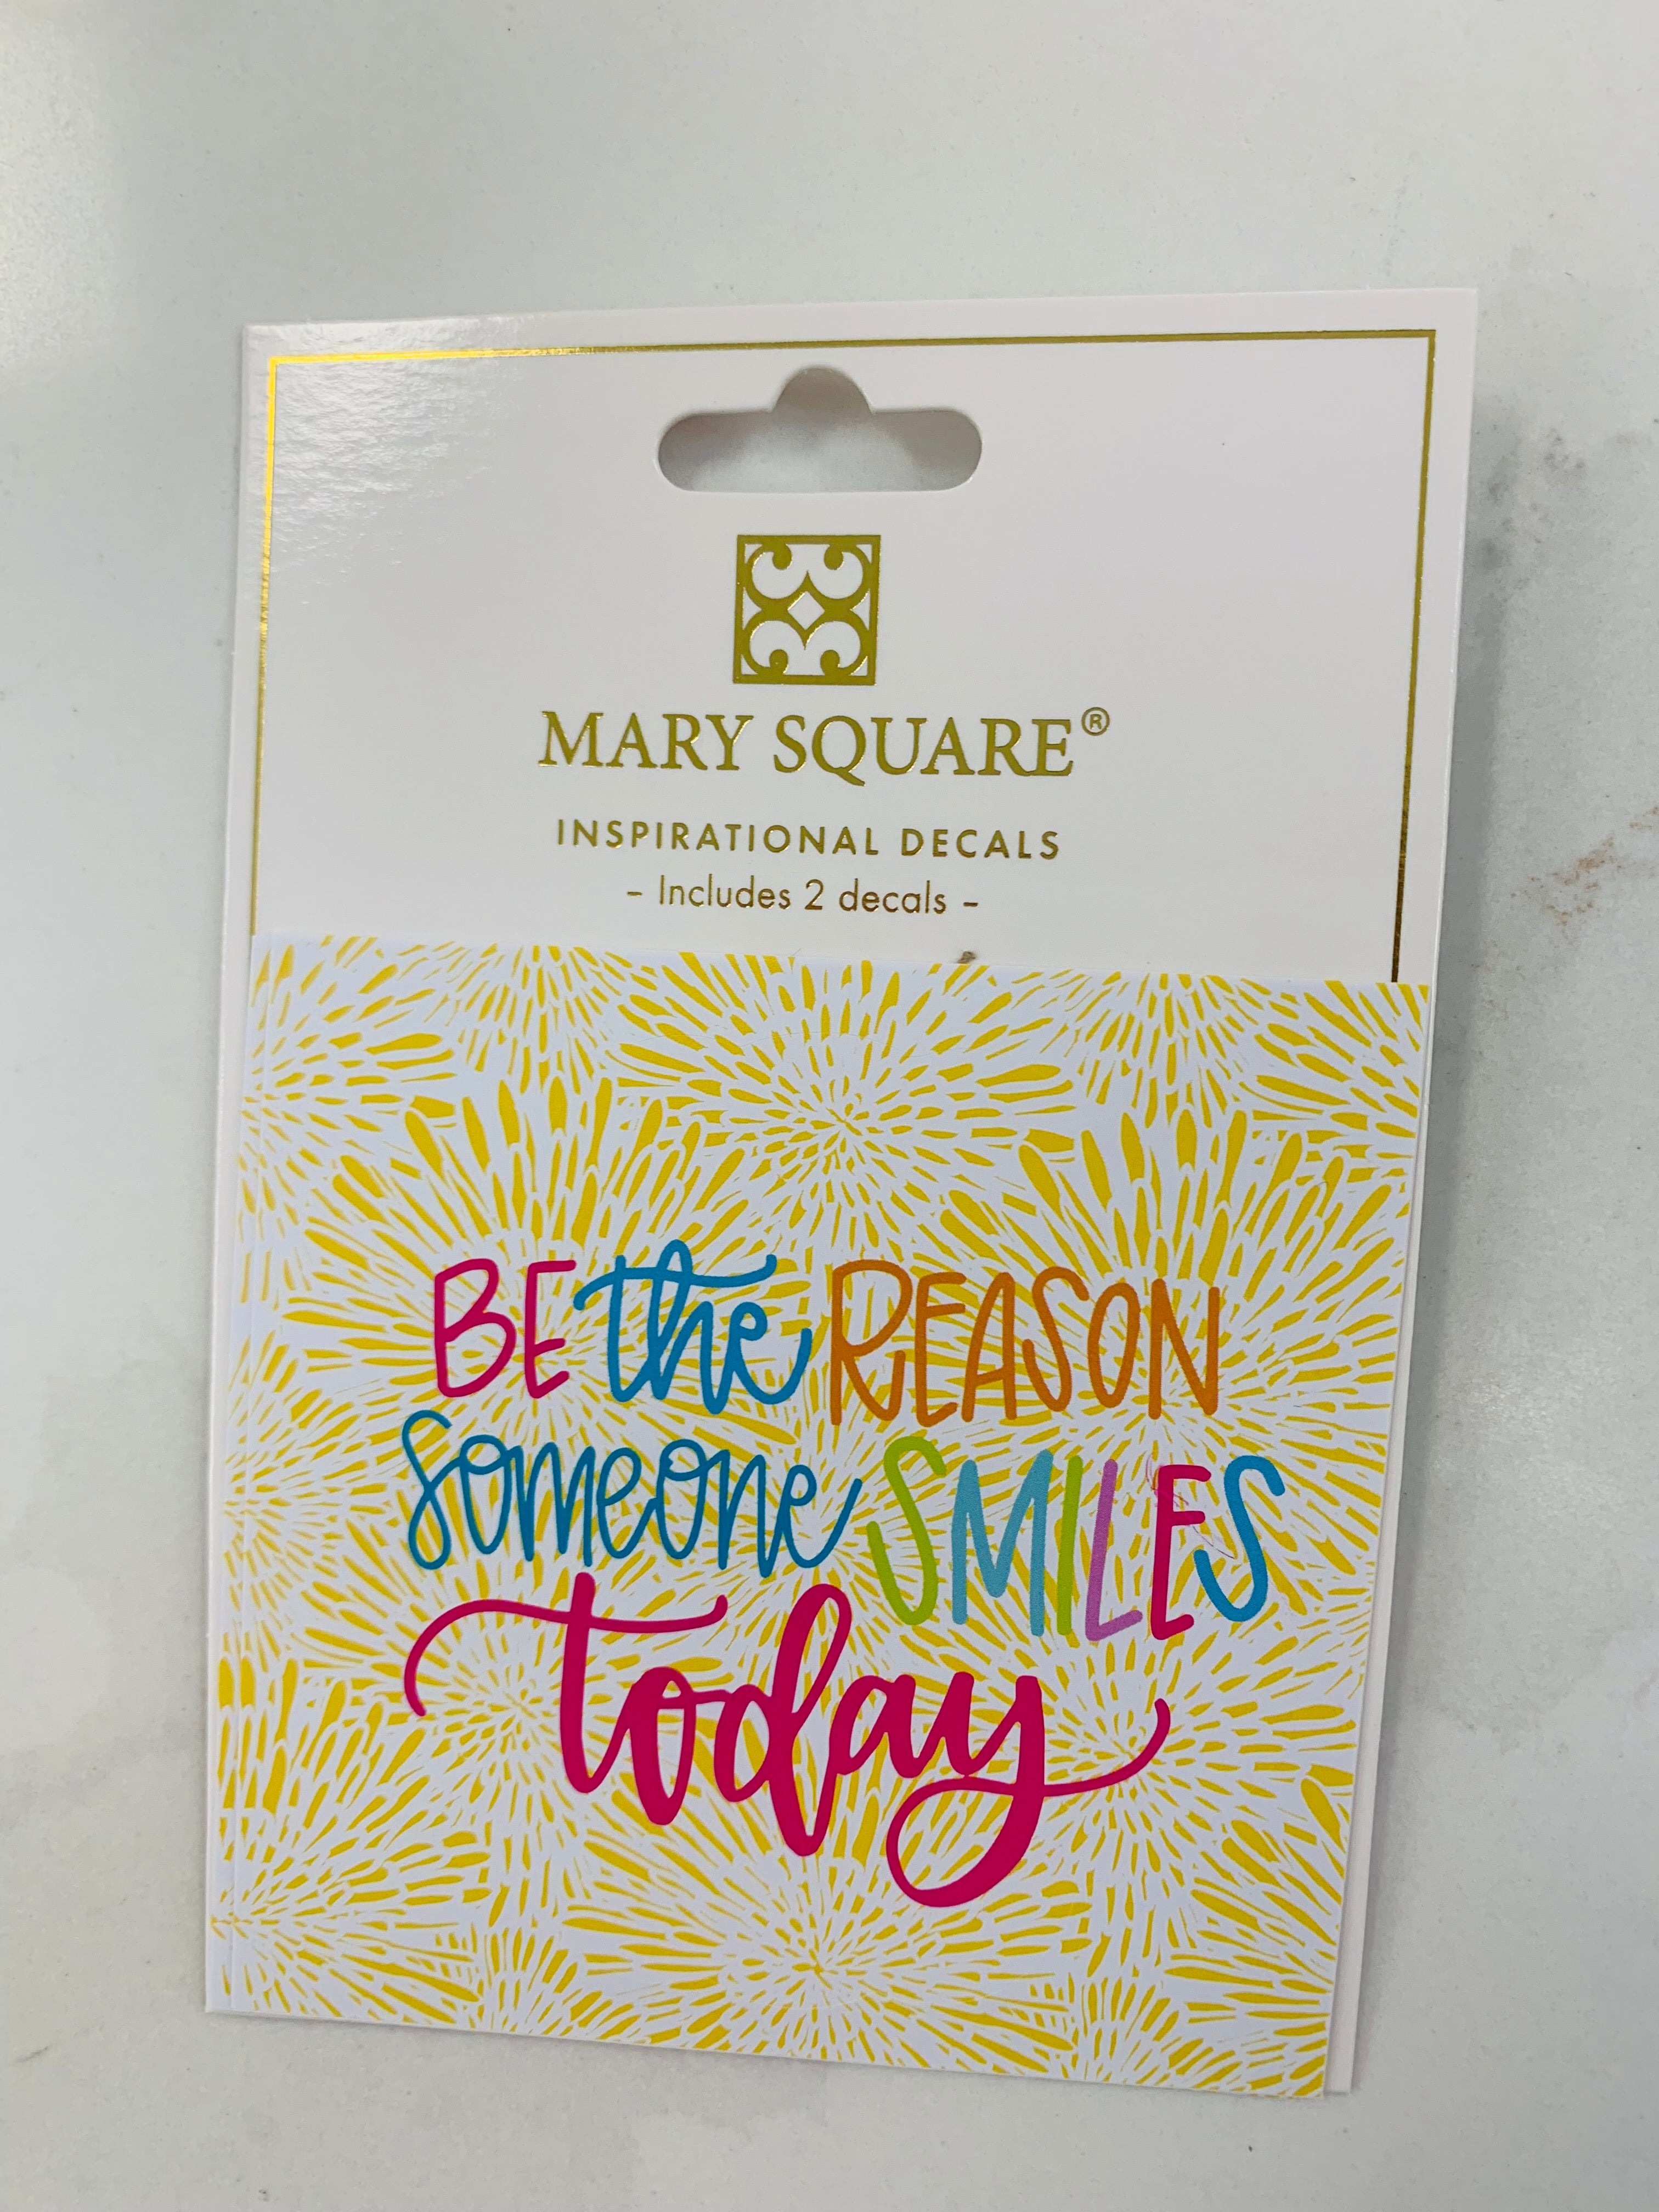 All She Wrote Notes - Inspirational Decals - Reason Someone Smiles